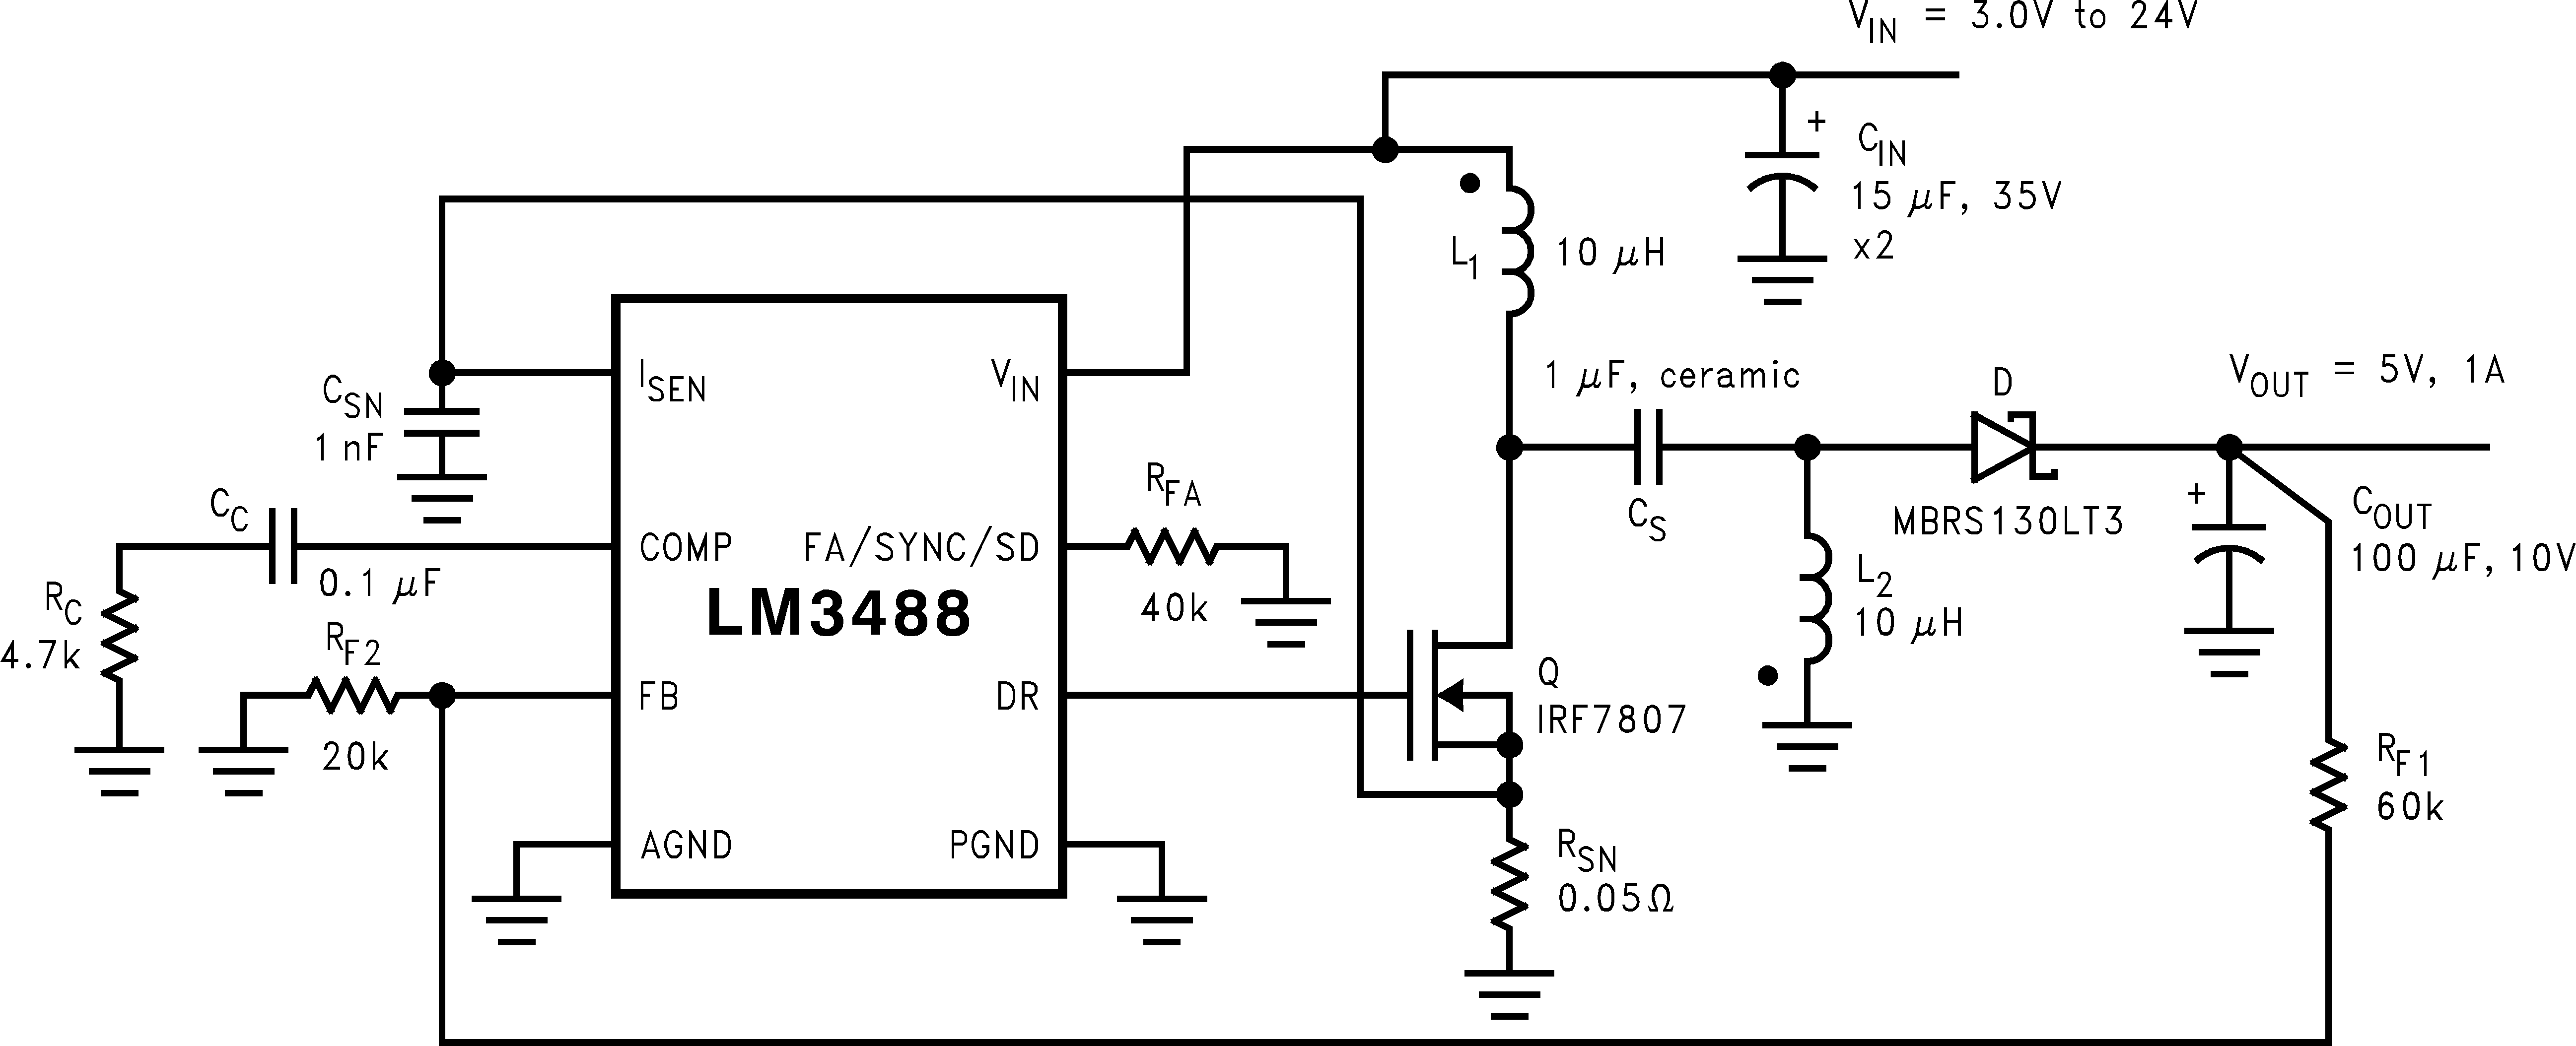 LM3488, DC/DC Converter, Buck-Boost, SEPIC, schematic LM3488 LM3488-Q1 LM3488_SEPIC_schematic.png